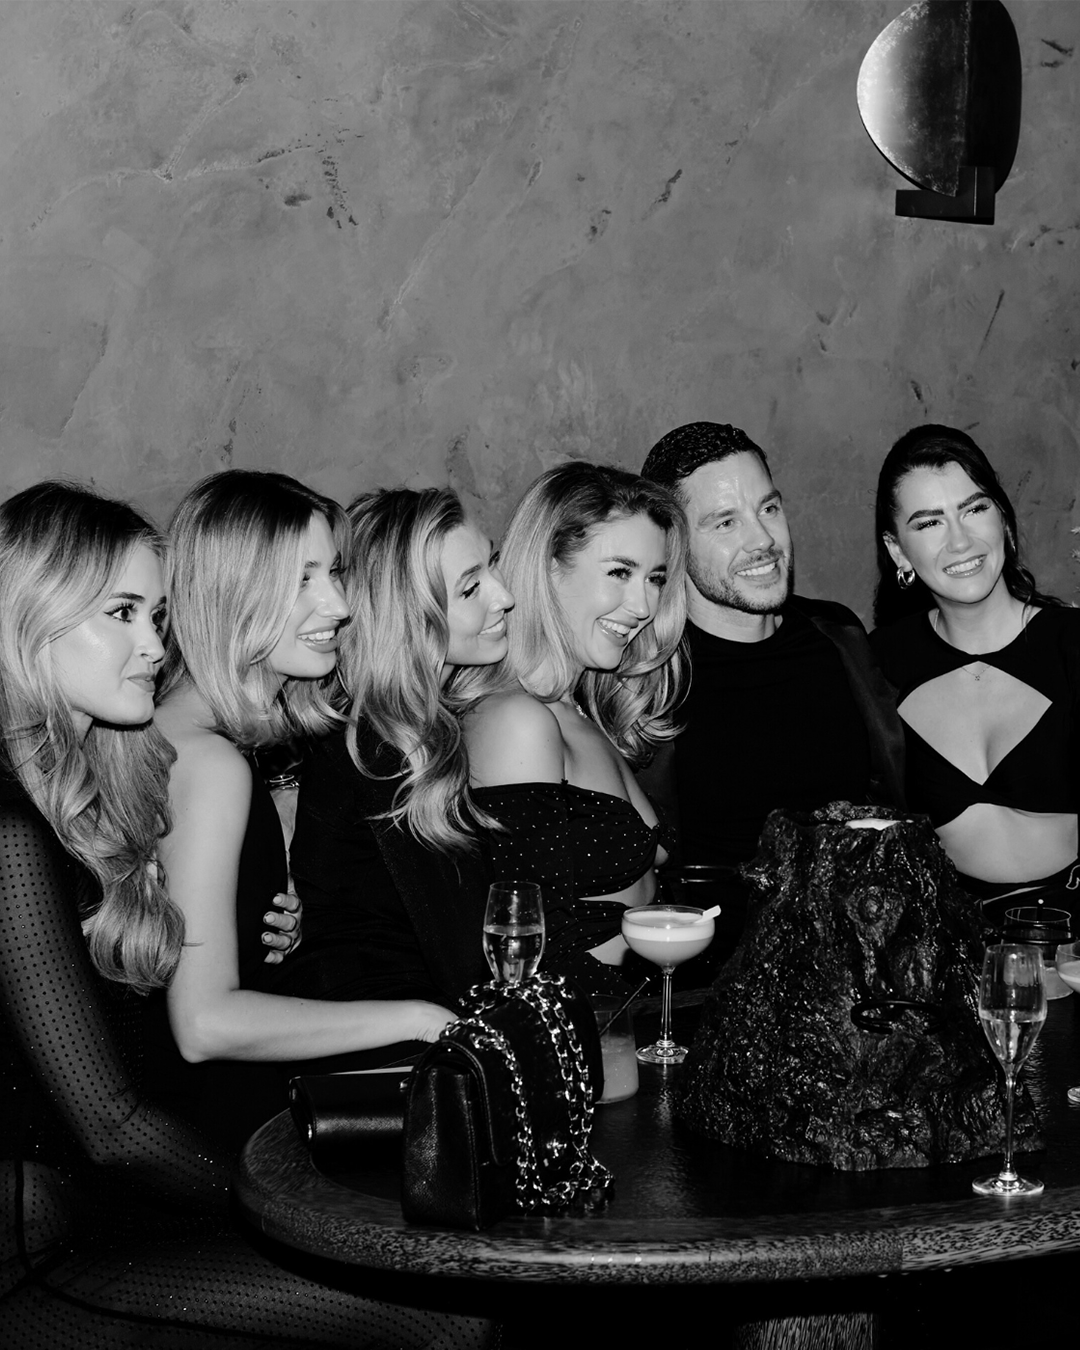 Fenix's Moonlight Parties are creating a new late-night offering in Manchester